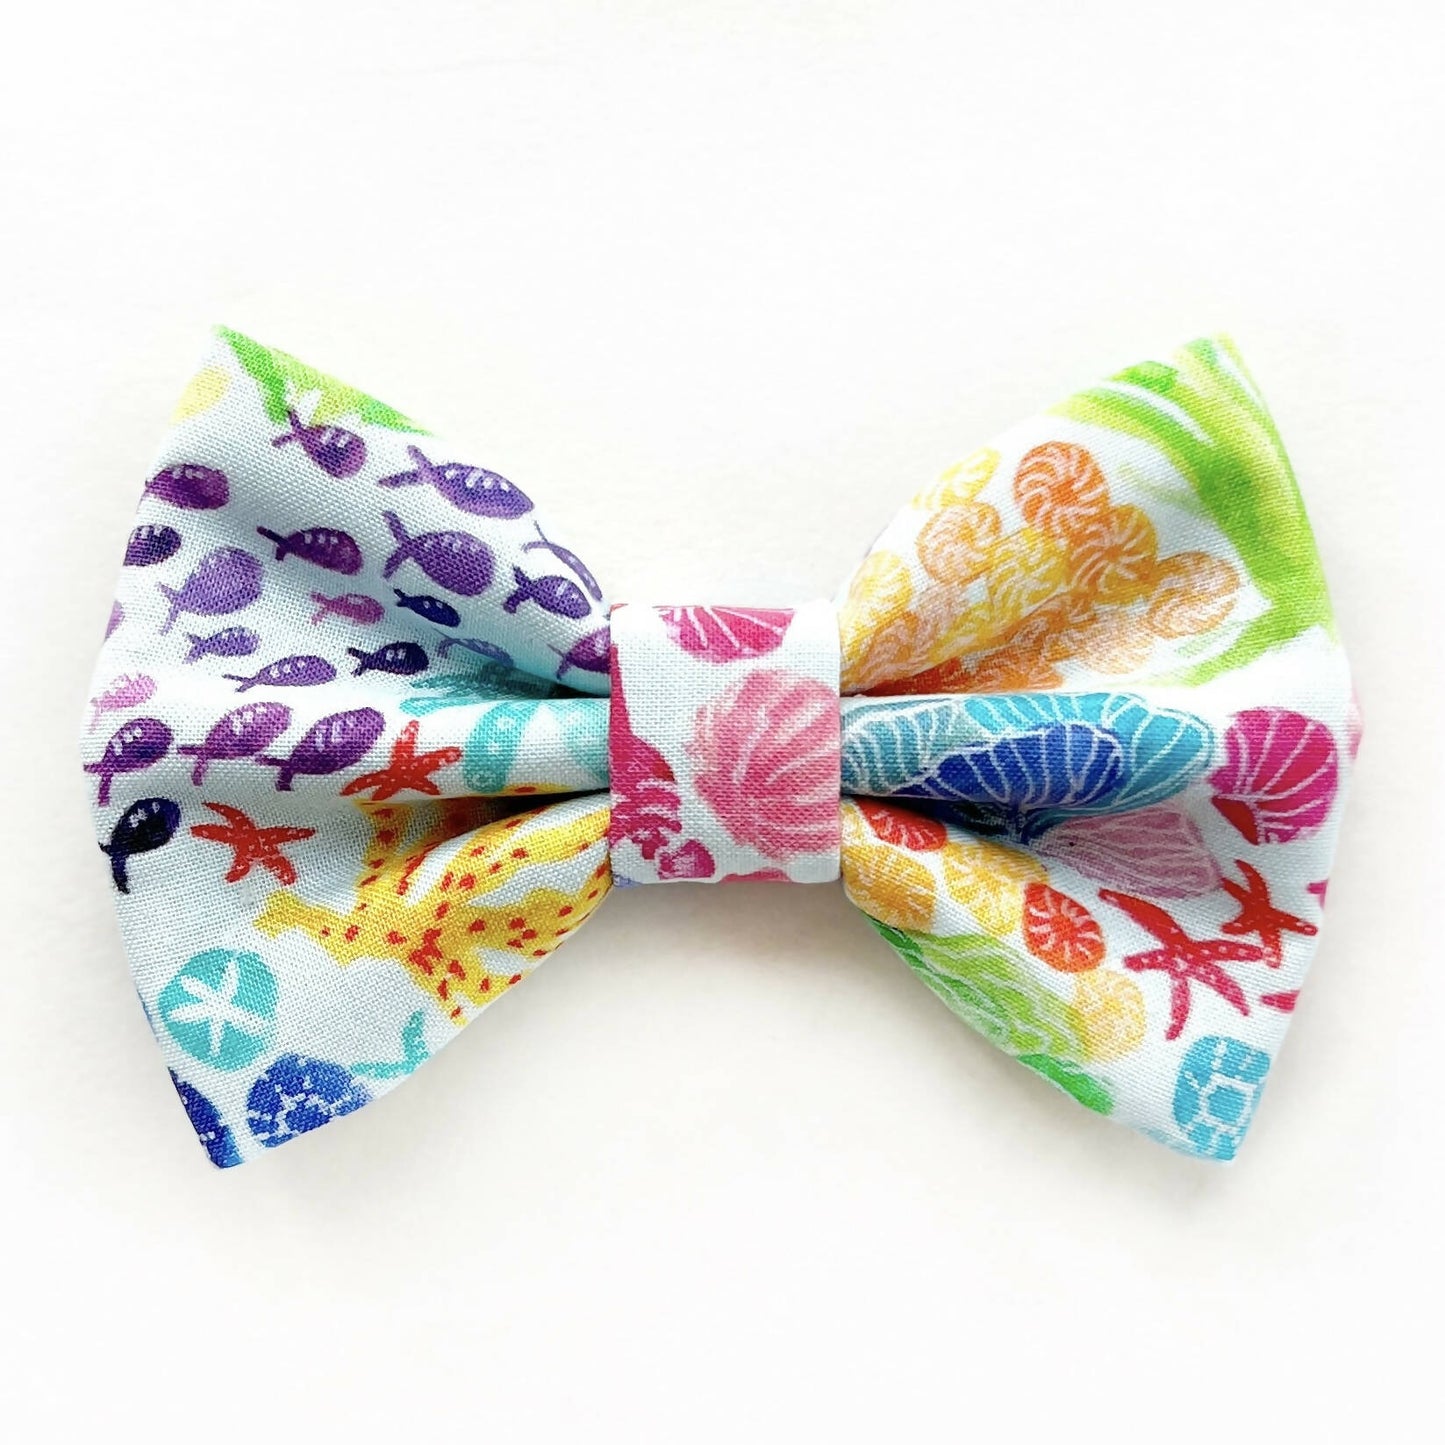 TAKE A BOW - Under the Sea - Bowtie